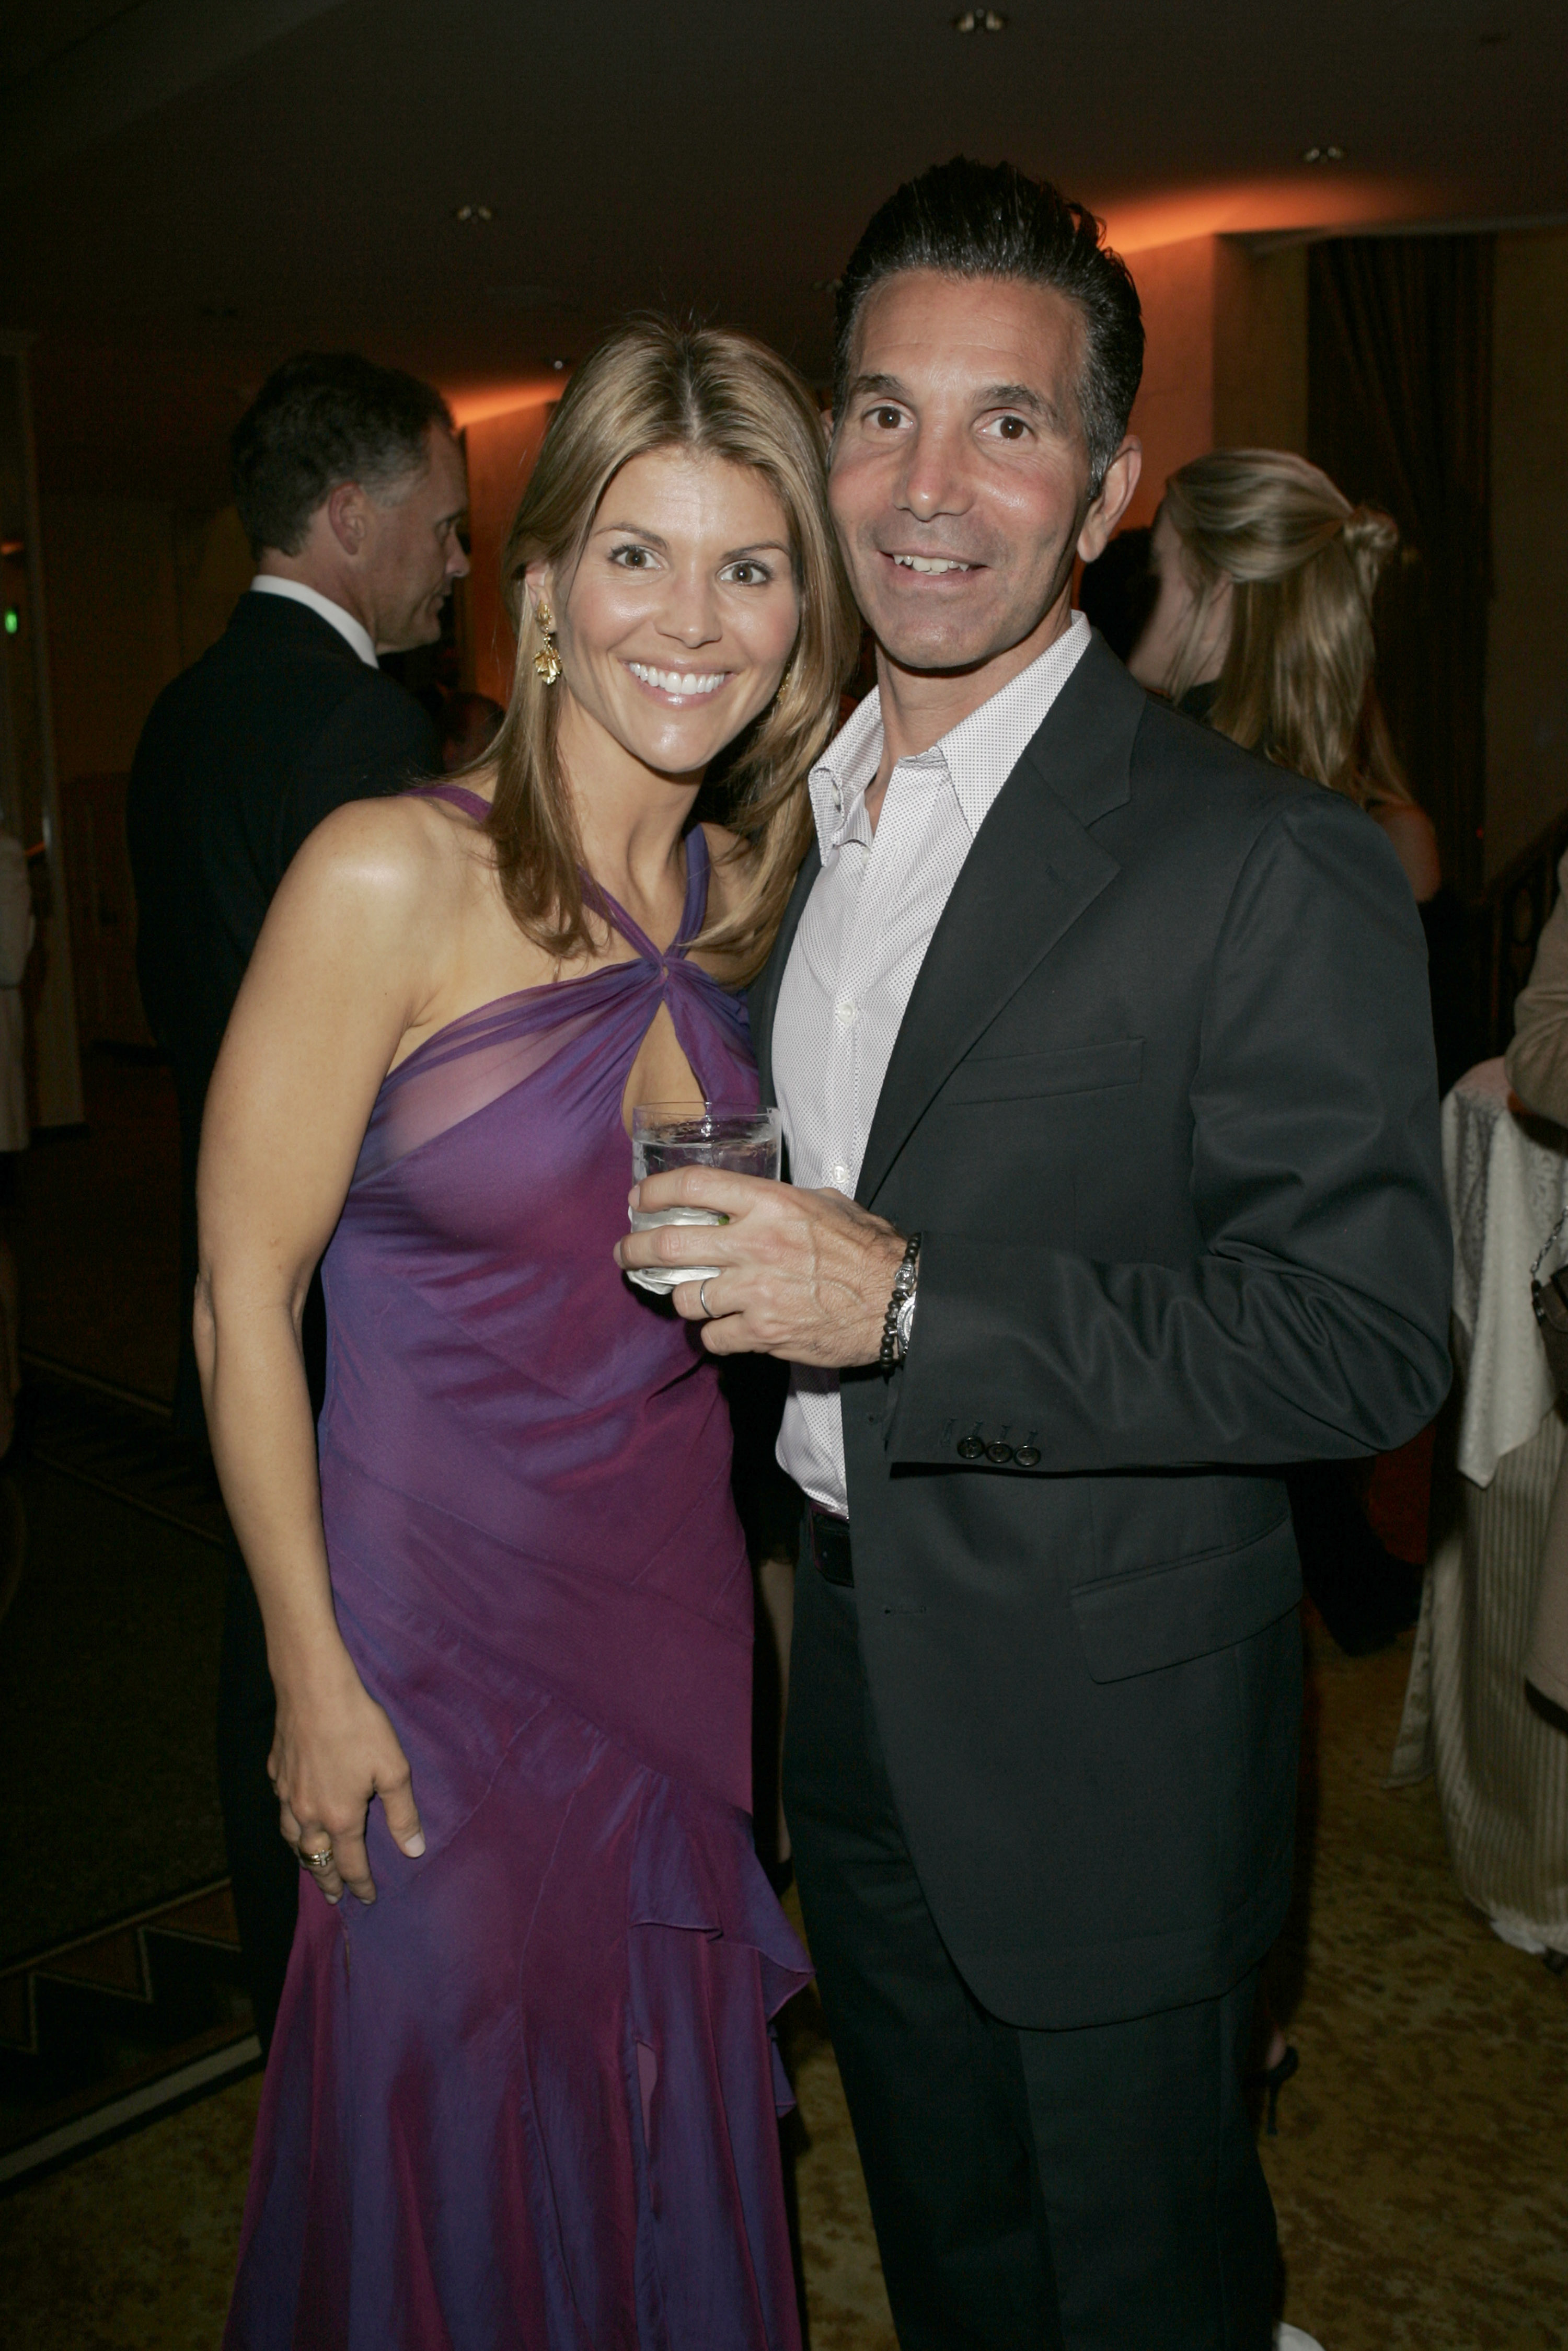 Lori Loughlin and Husband Mossimo Giannulli's Relationship Timeline